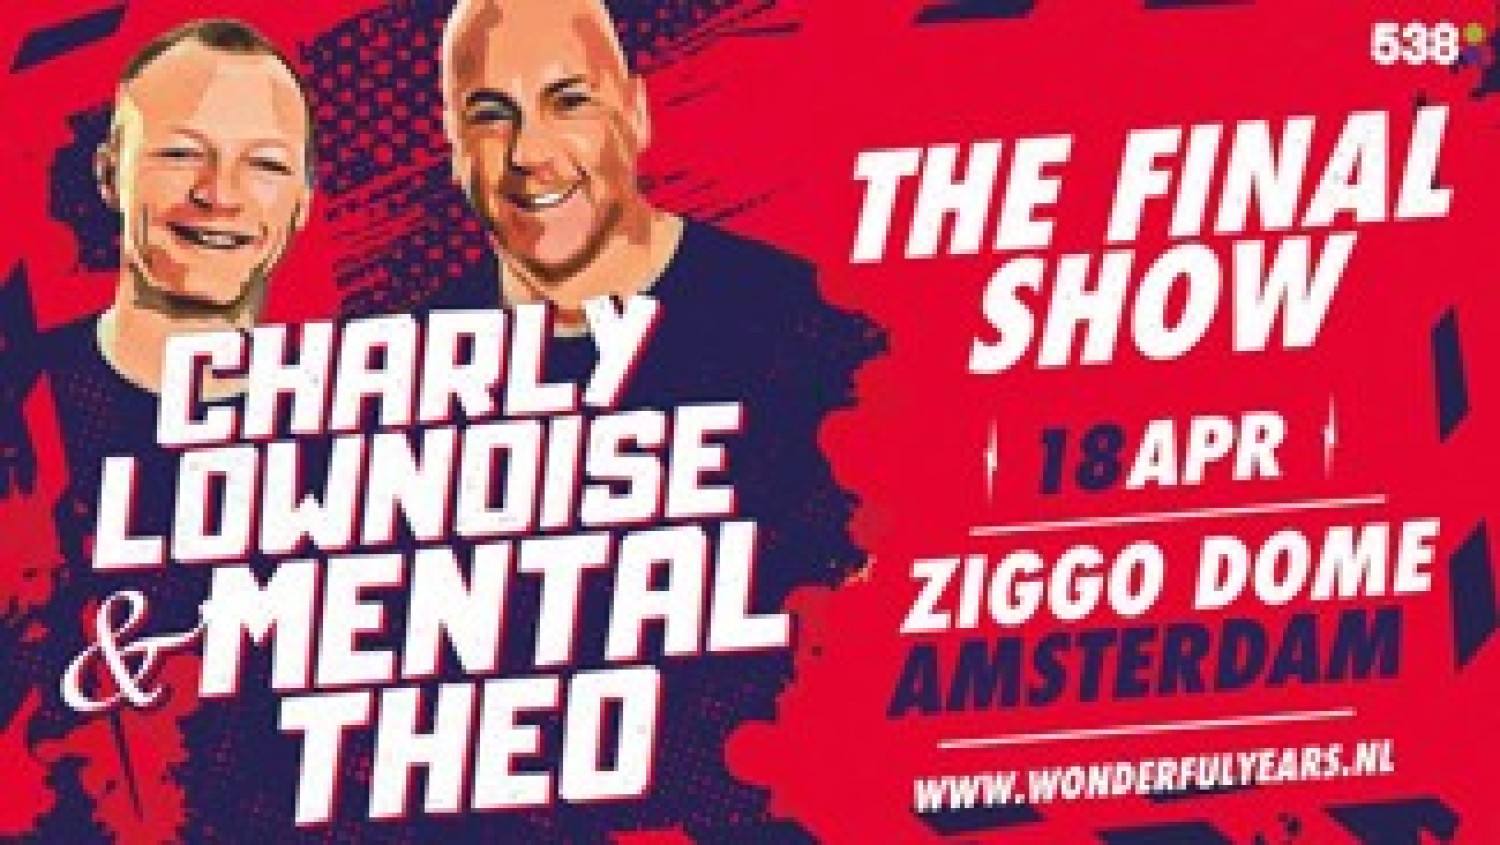 Party nieuws: Charly Lownoise & Mental Theo stoppen